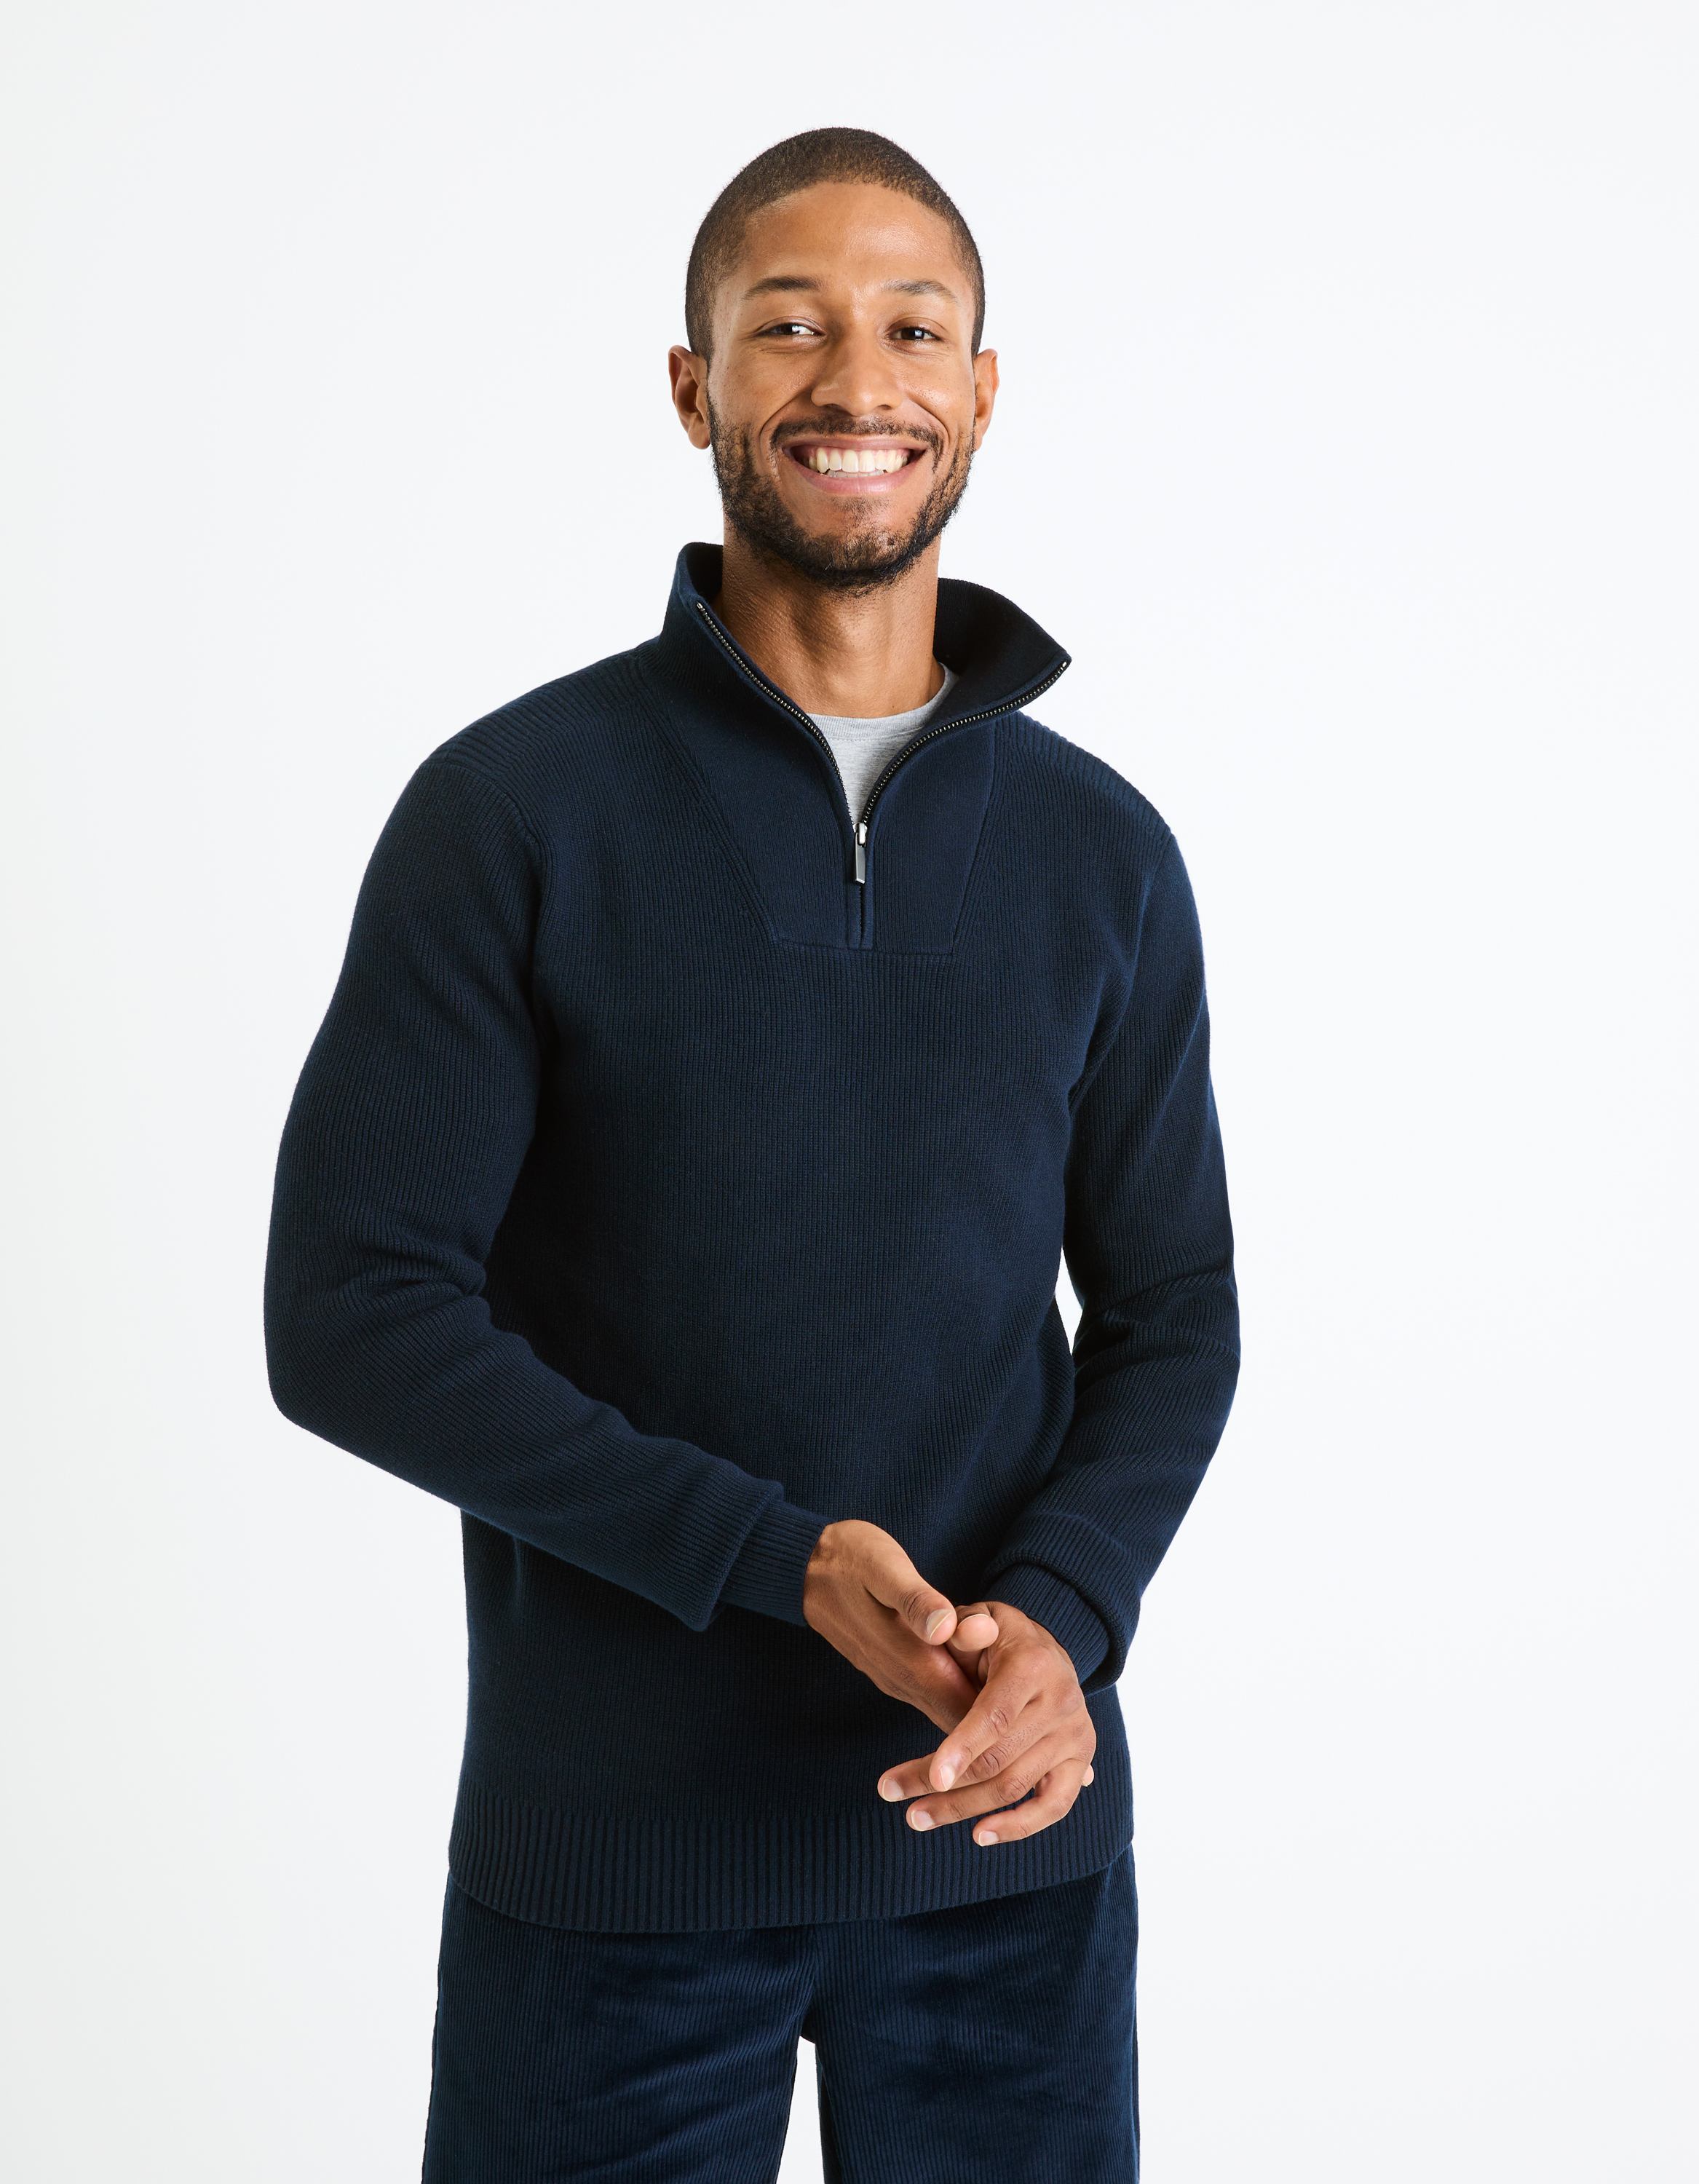 Celio Sweater with stand-up collar Fetrucker - Men